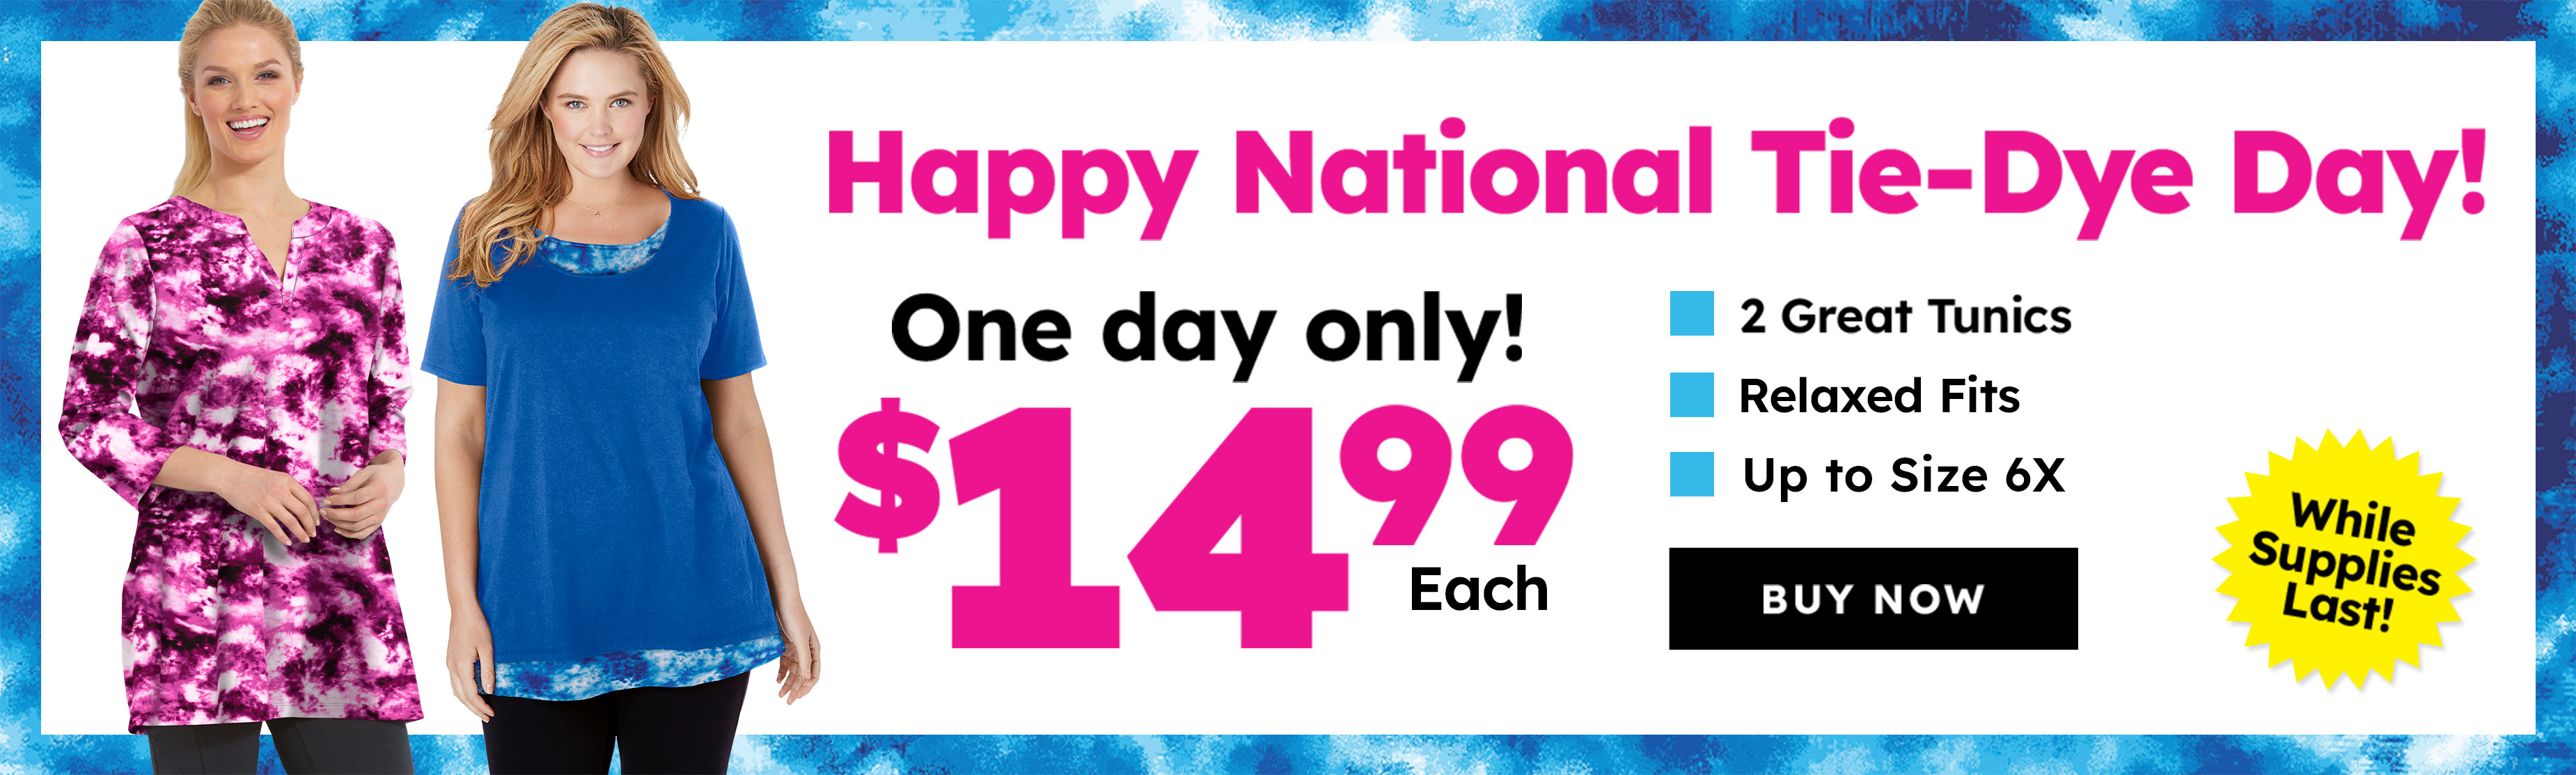 Happy National Tie-Dye Day! one day only! $14.99 each buy now